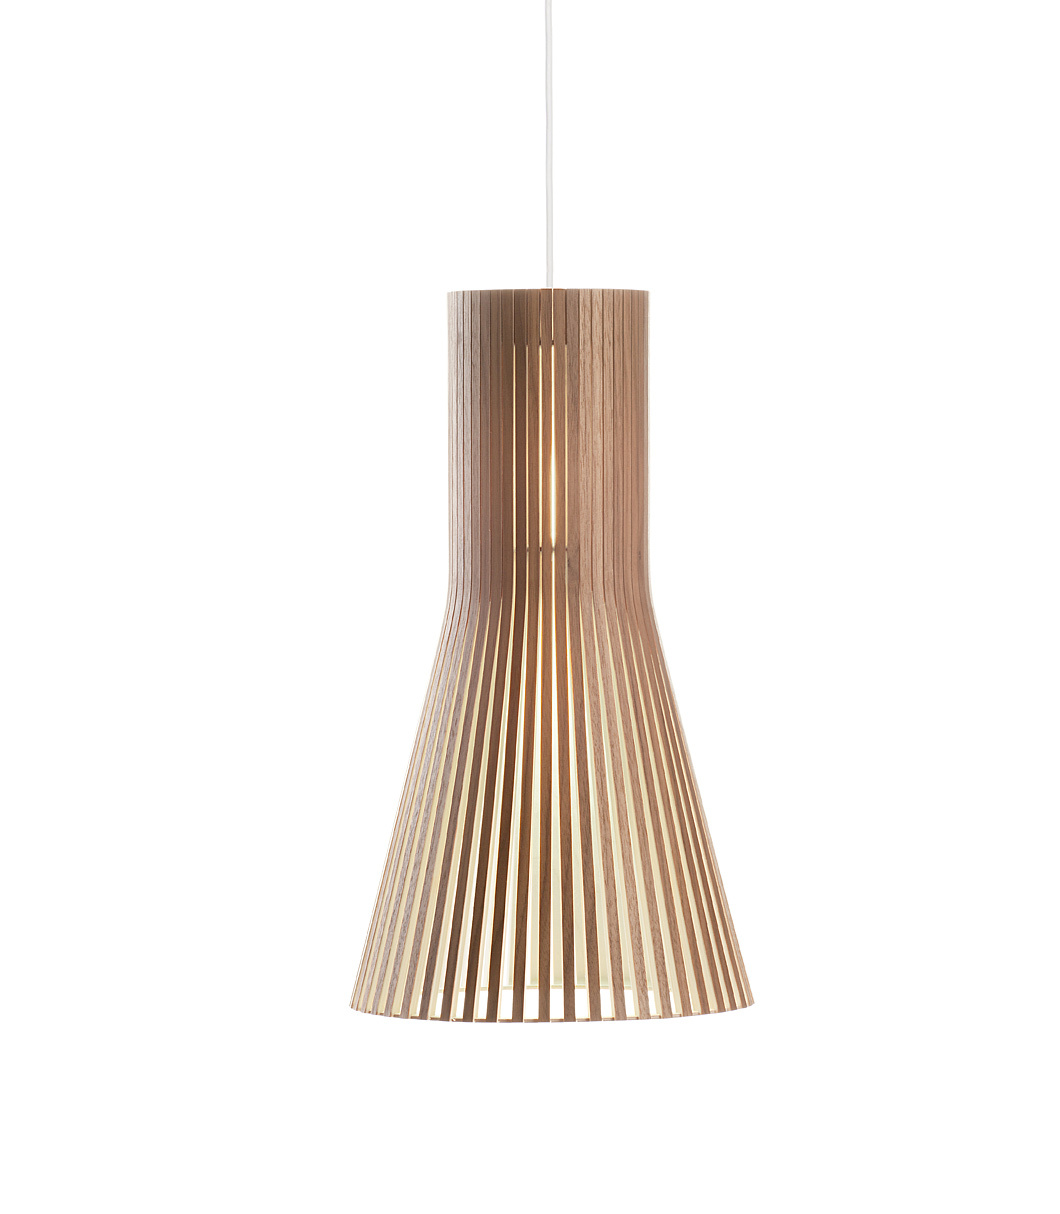 Secto Small 4201 pendant lamp is available in walnut veneer